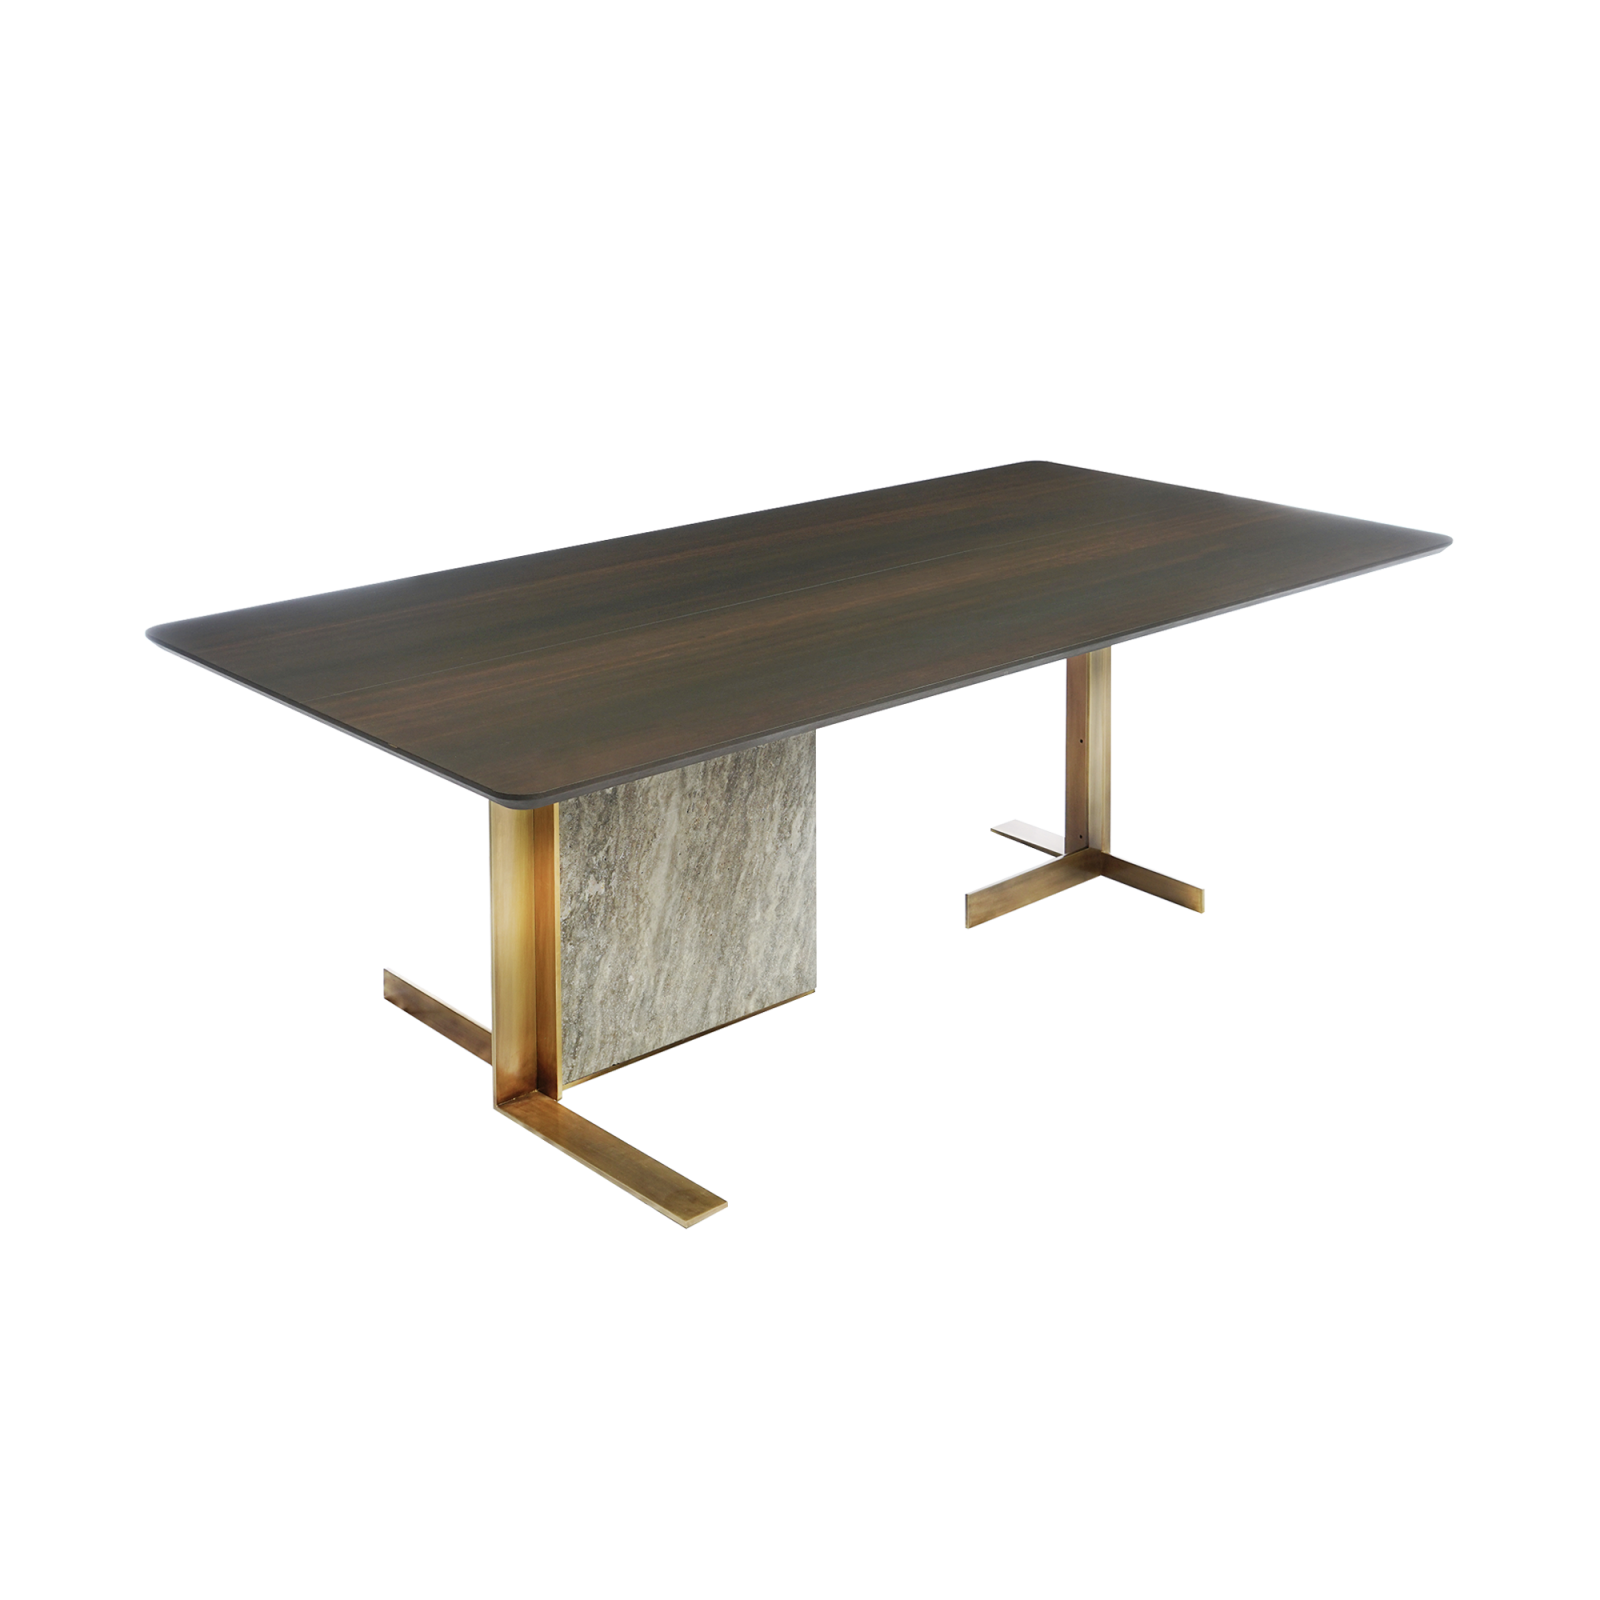 rectangular Inca Table which is made of aged brass with travertine marble standing in front of white background.